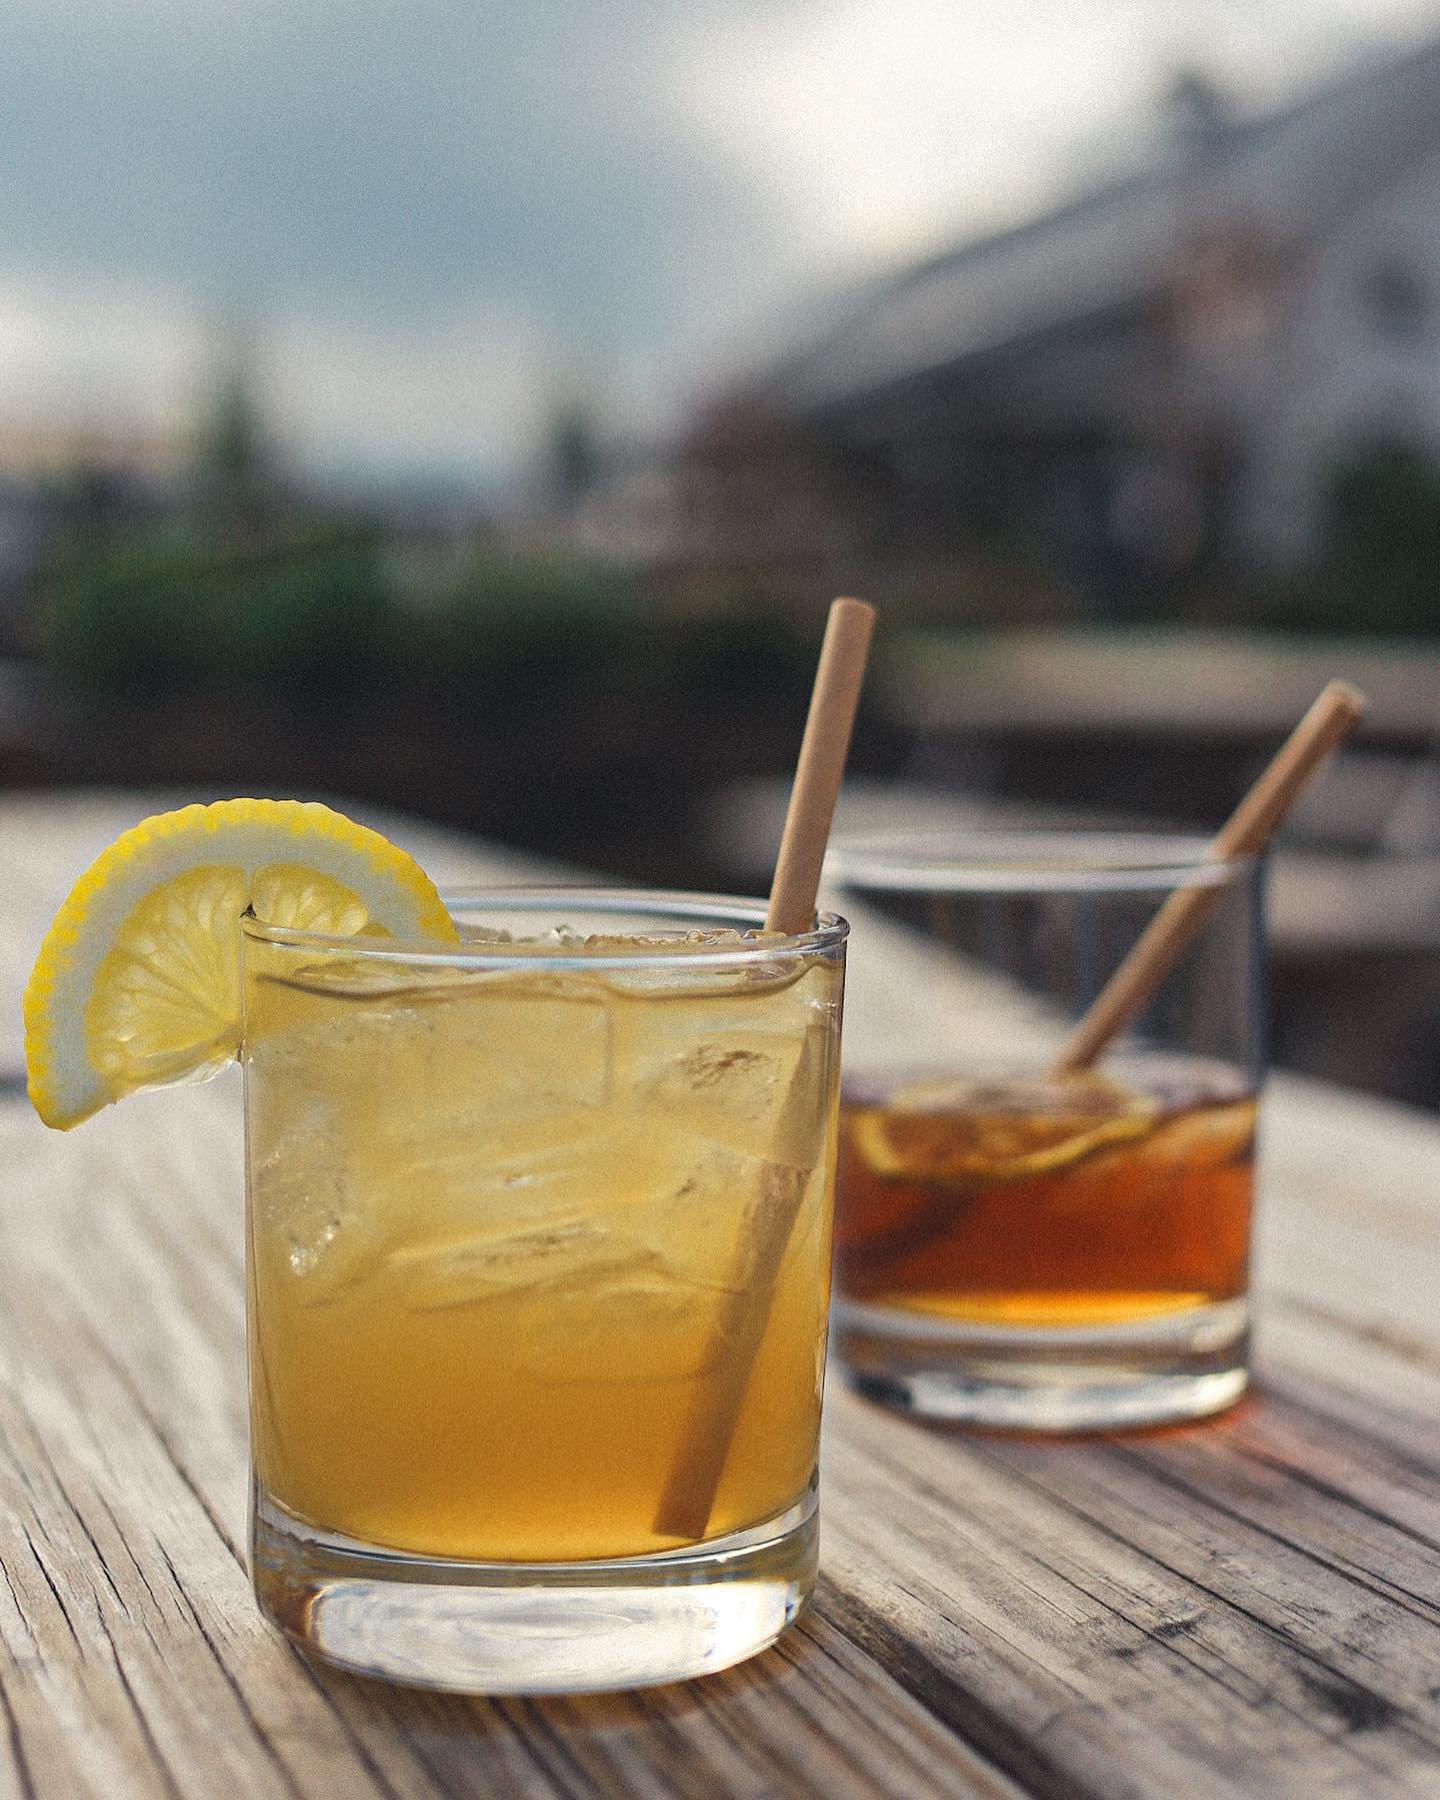 A little update to our cocktail menu, two fresh options to sip on this spring!⁣
On the left: 𝐏𝐞𝐚𝐜𝐡 𝐁𝐨𝐮𝐫𝐛𝐨𝐧 𝐒𝐦𝐚𝐬𝐡⁣
Watershed Bourbon, Peach Liqueur, Lemon Juice, Honey Syrup⁣
On the right: 𝐑𝐲𝐞 𝐒𝐭𝐨𝐧𝐞 𝐆𝐢𝐧𝐠𝐞𝐫⁣
Barrel-Aged C